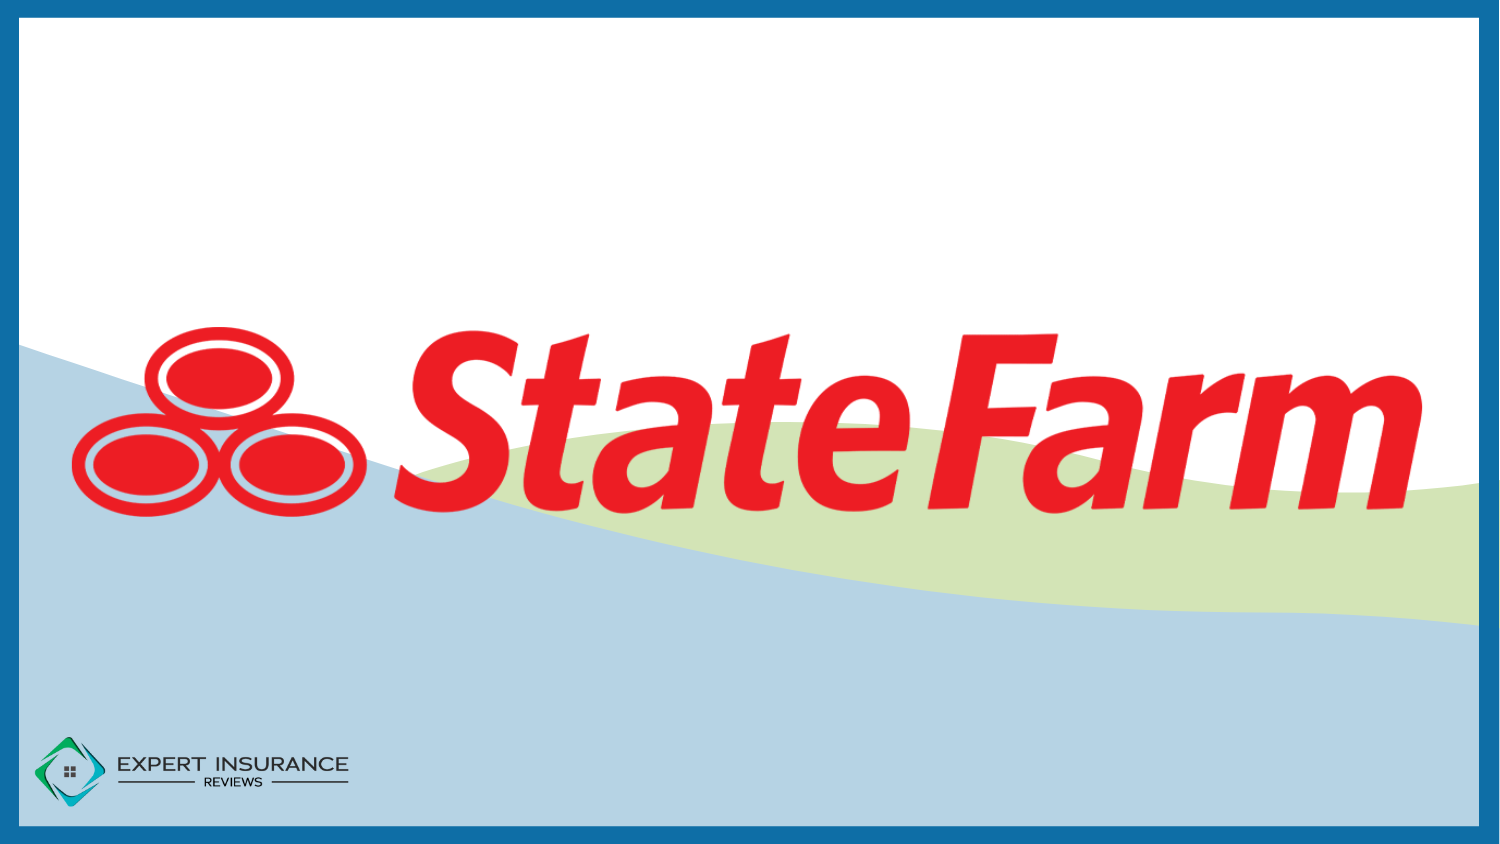 State farm: 10 Best Car Insurance Companies for Fords